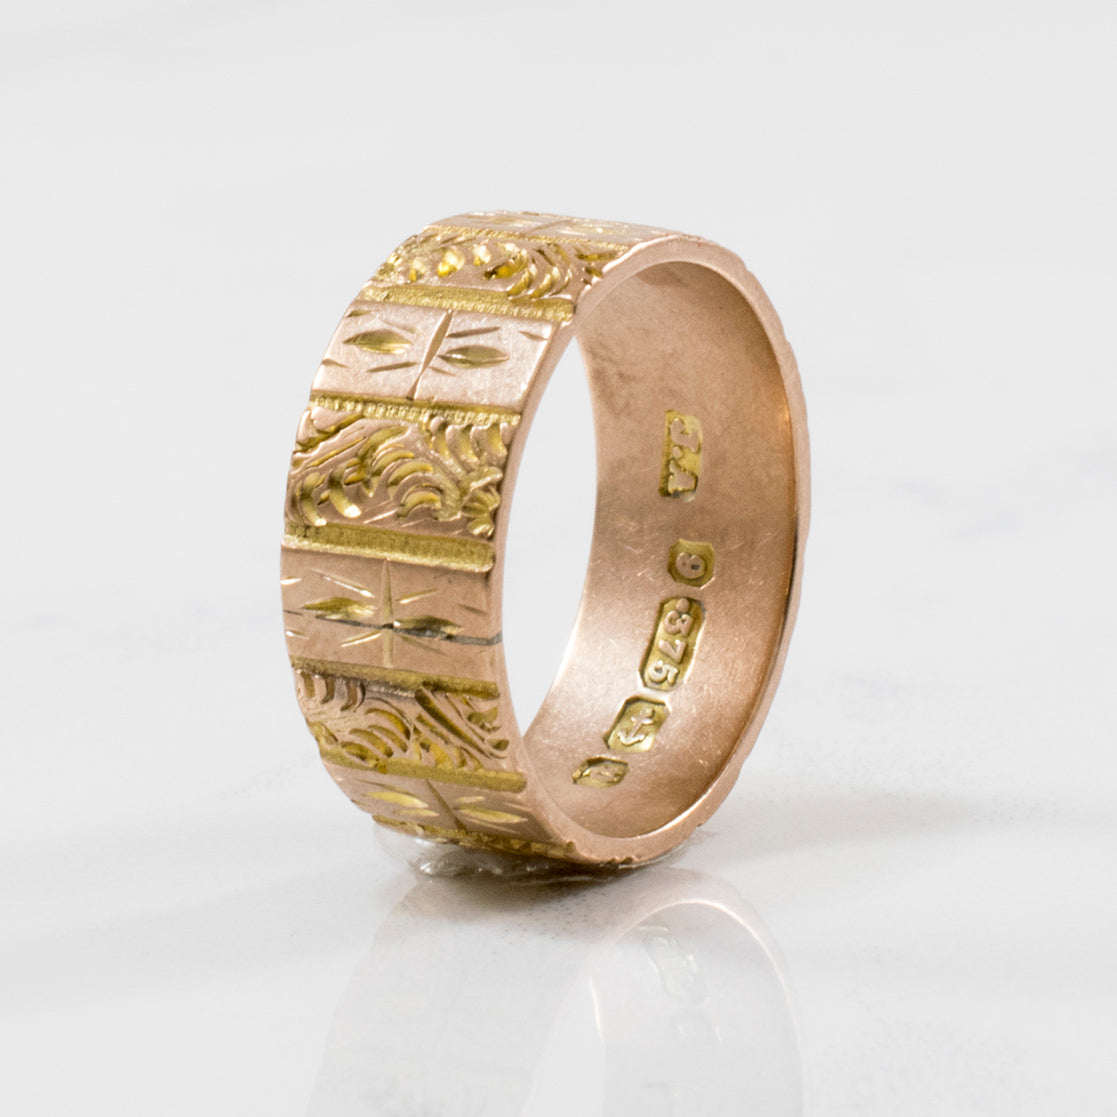 1890's Hand Carved Band | SZ 6.75 |